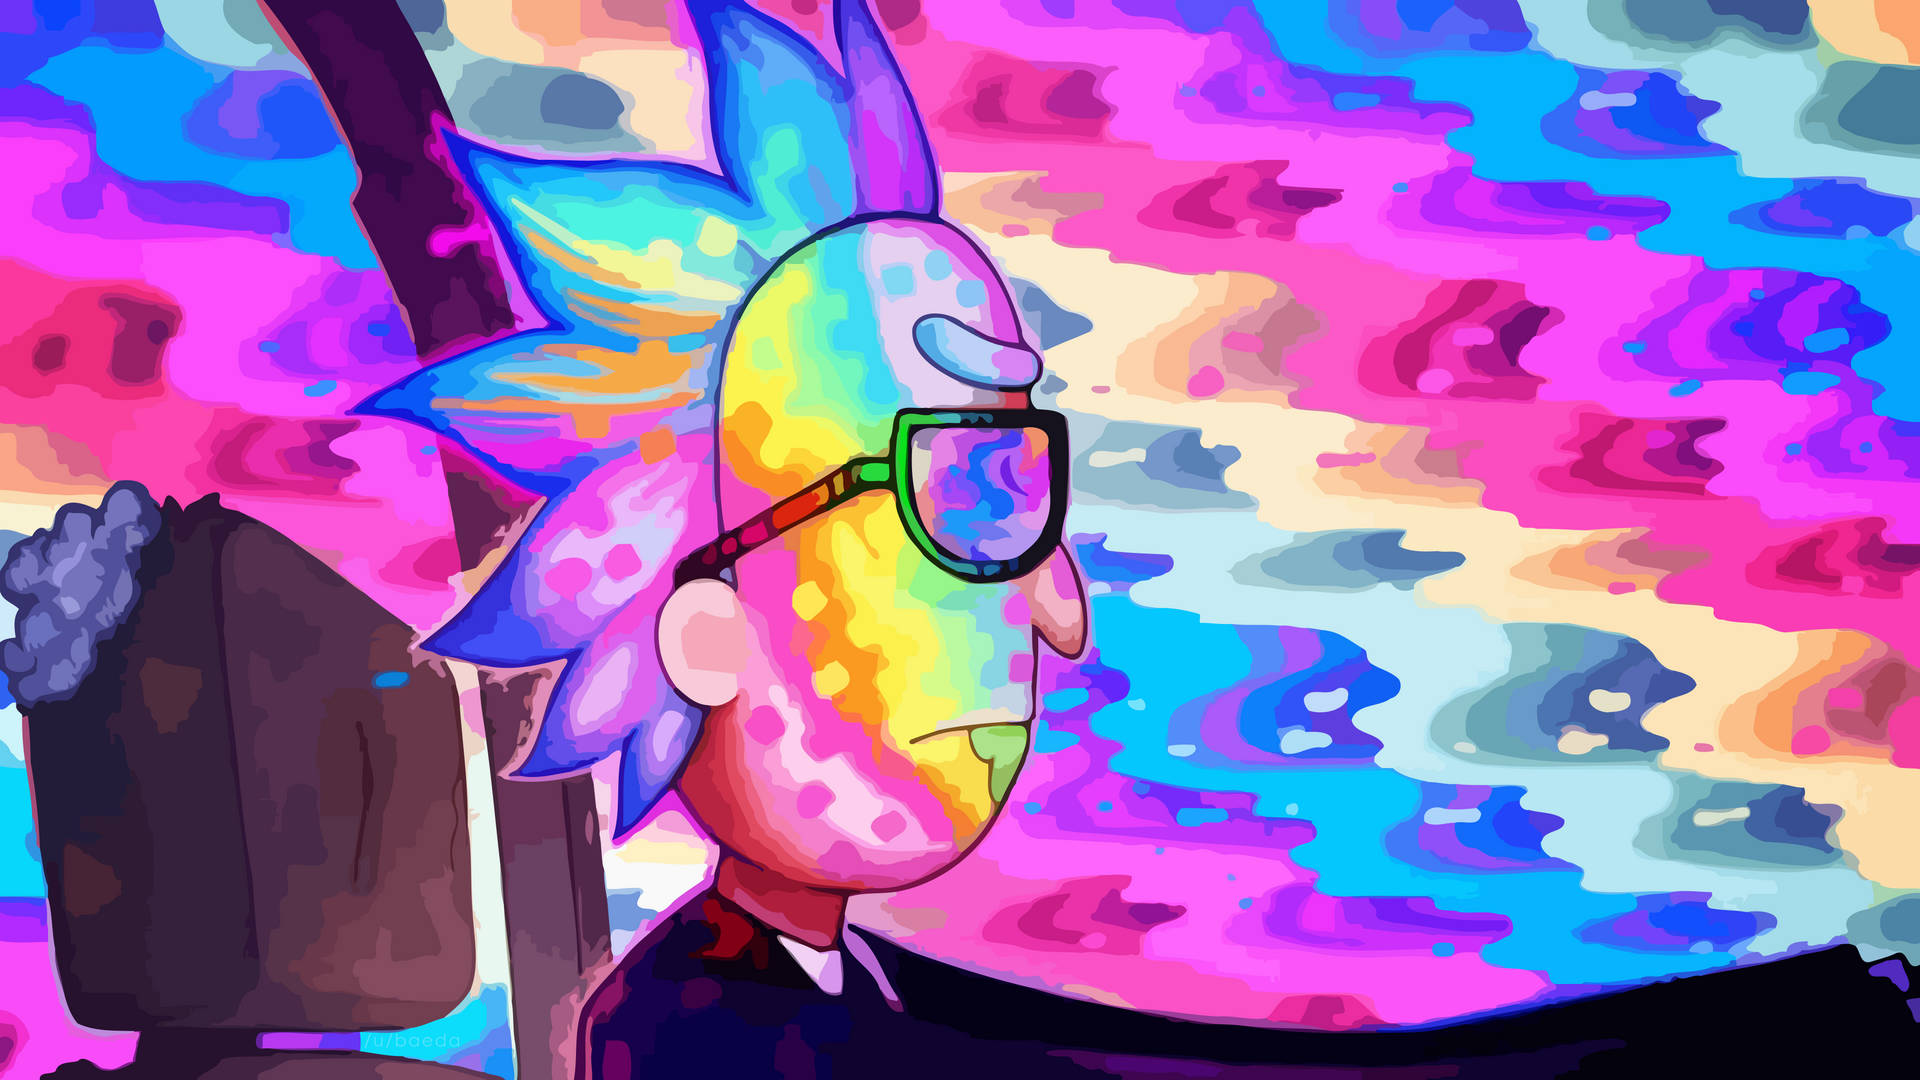 Psychedelic Rick And Morty PC 4K Wallpaper